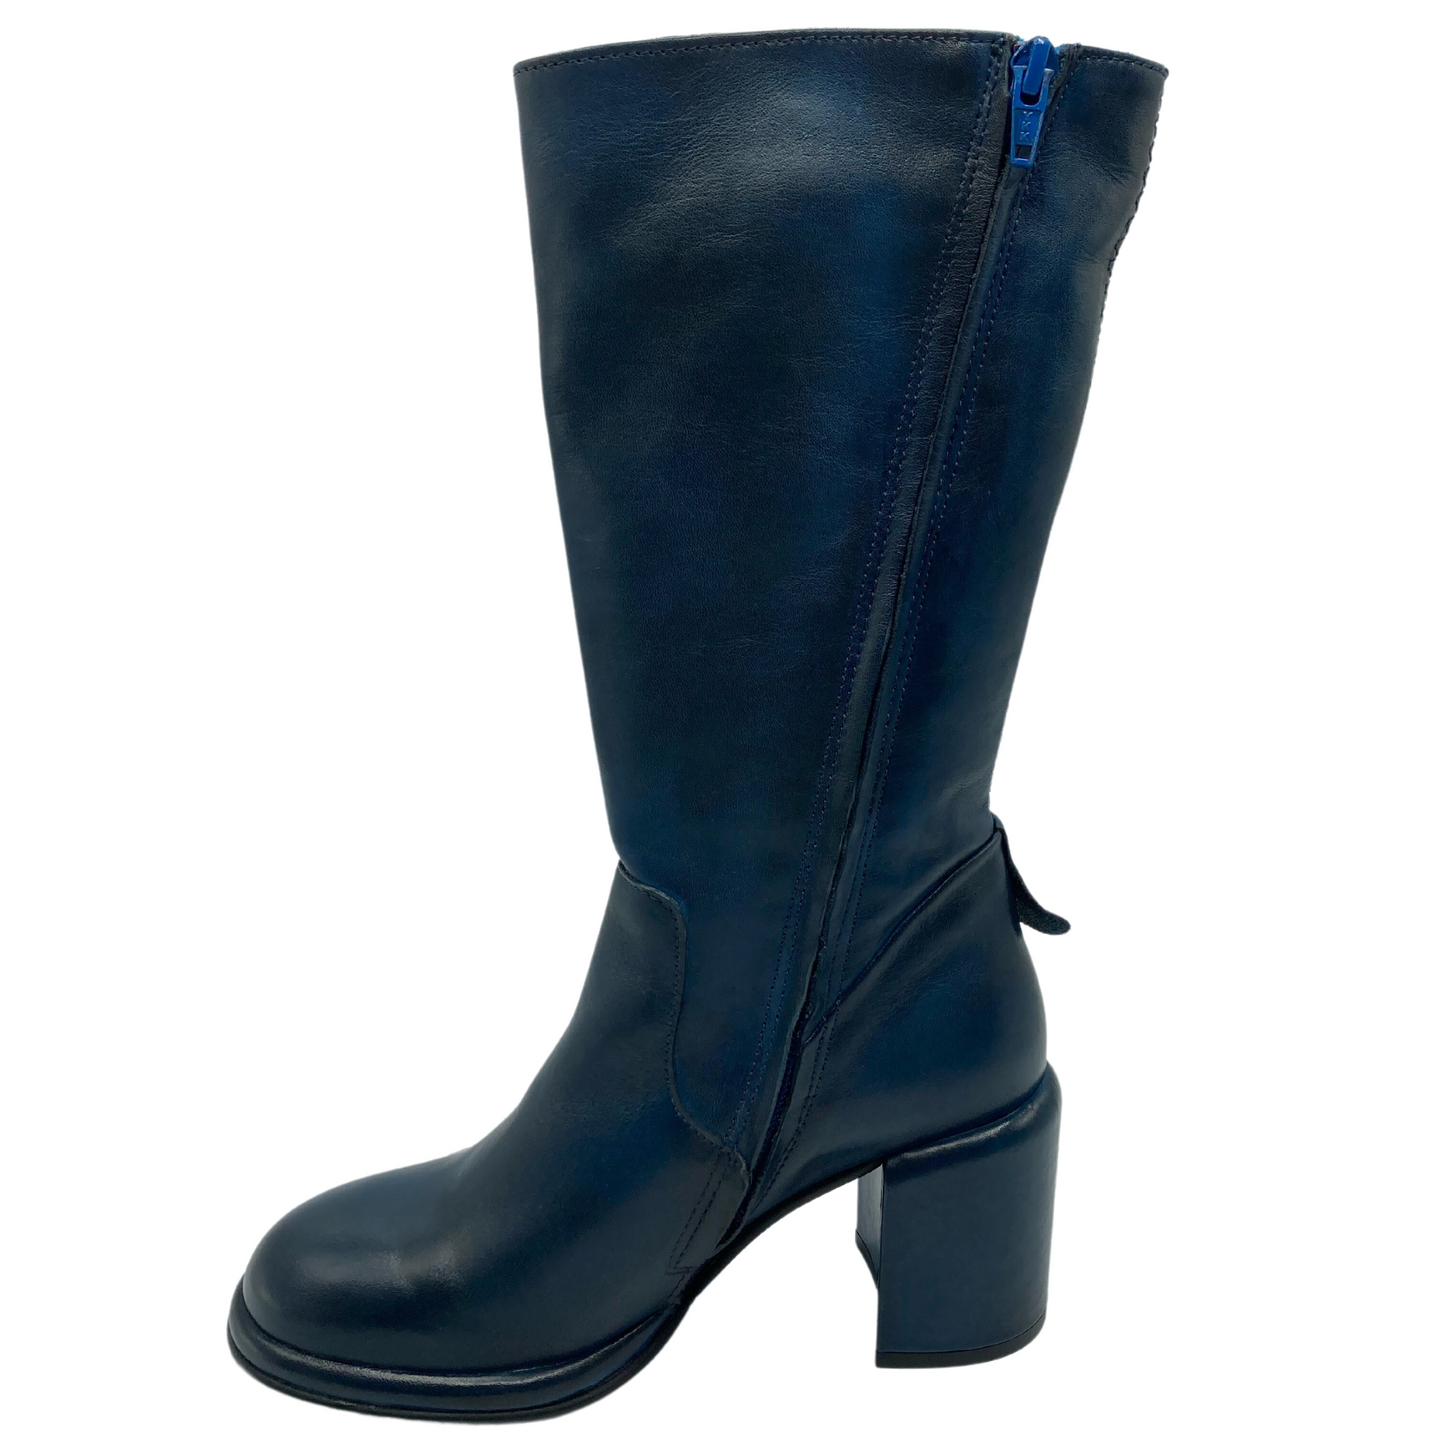 Left facing view of blue leather boot with block heel and zipper closure